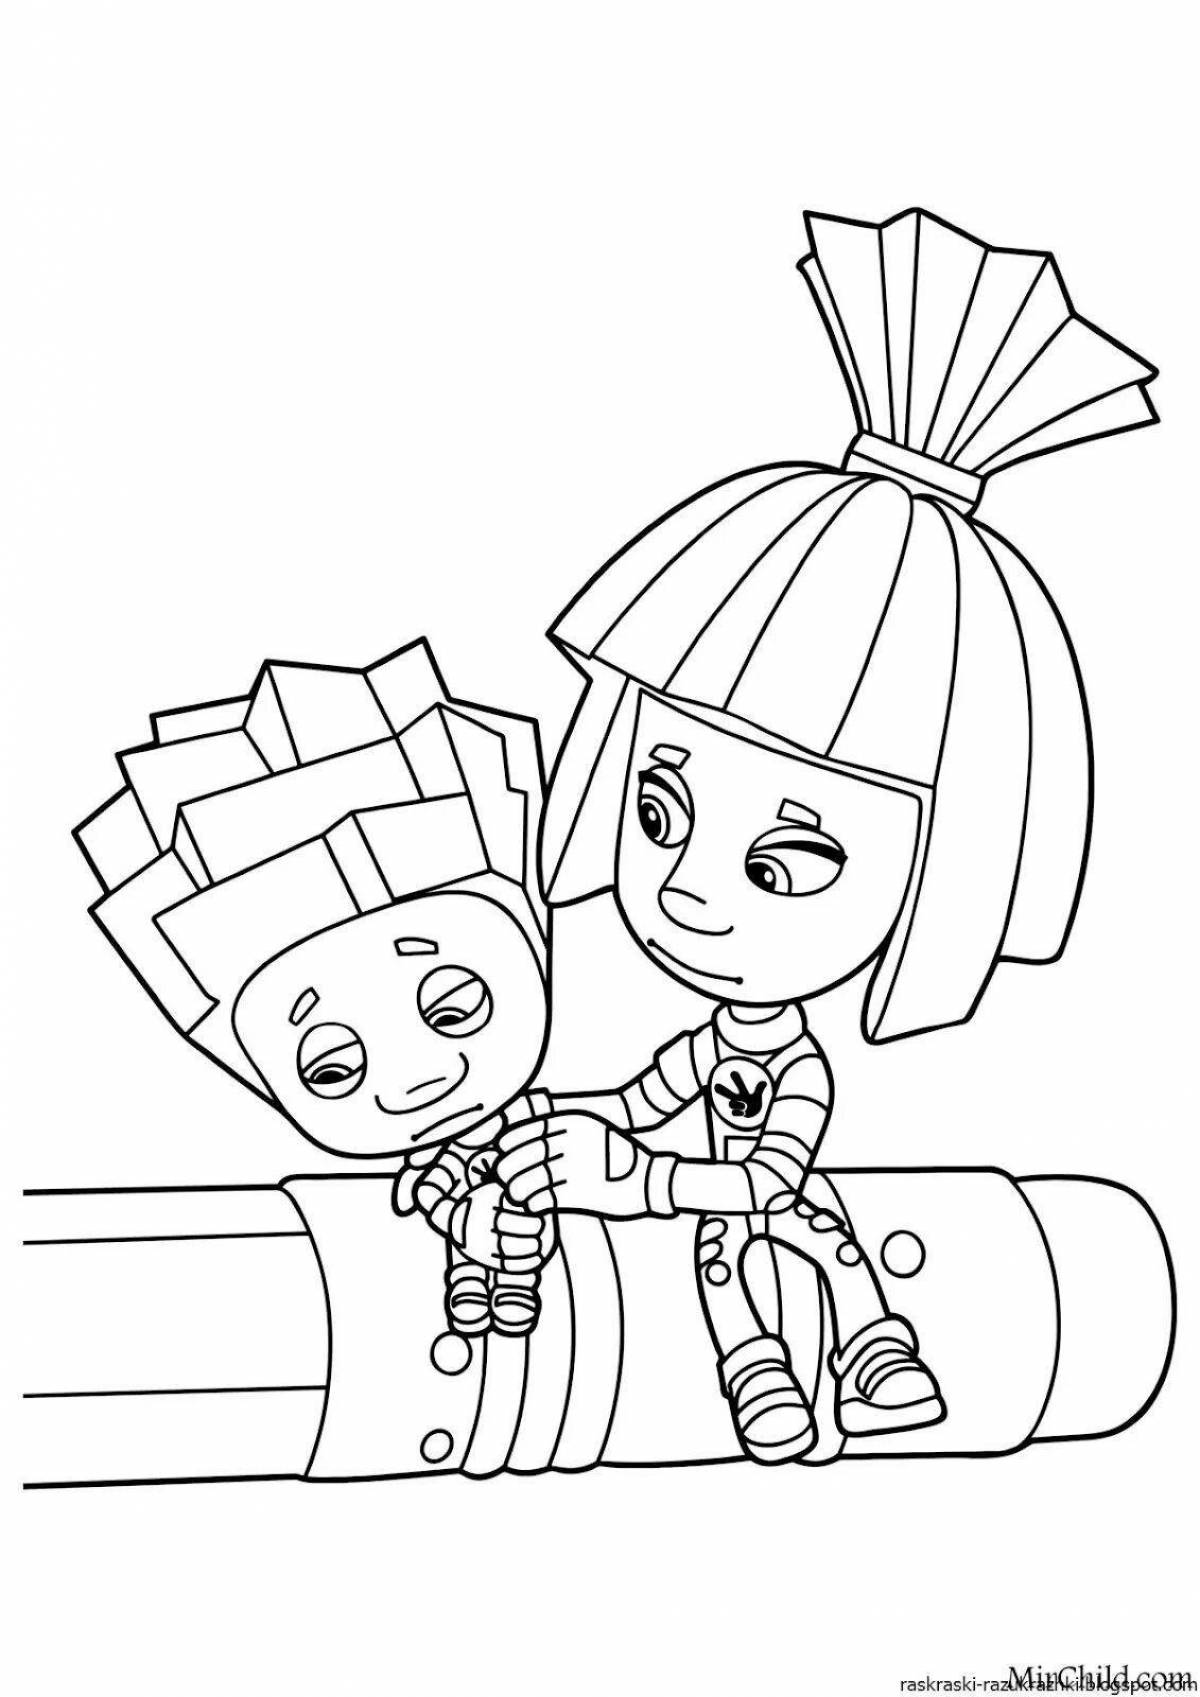 Fabulous fixies coloring pages for boys